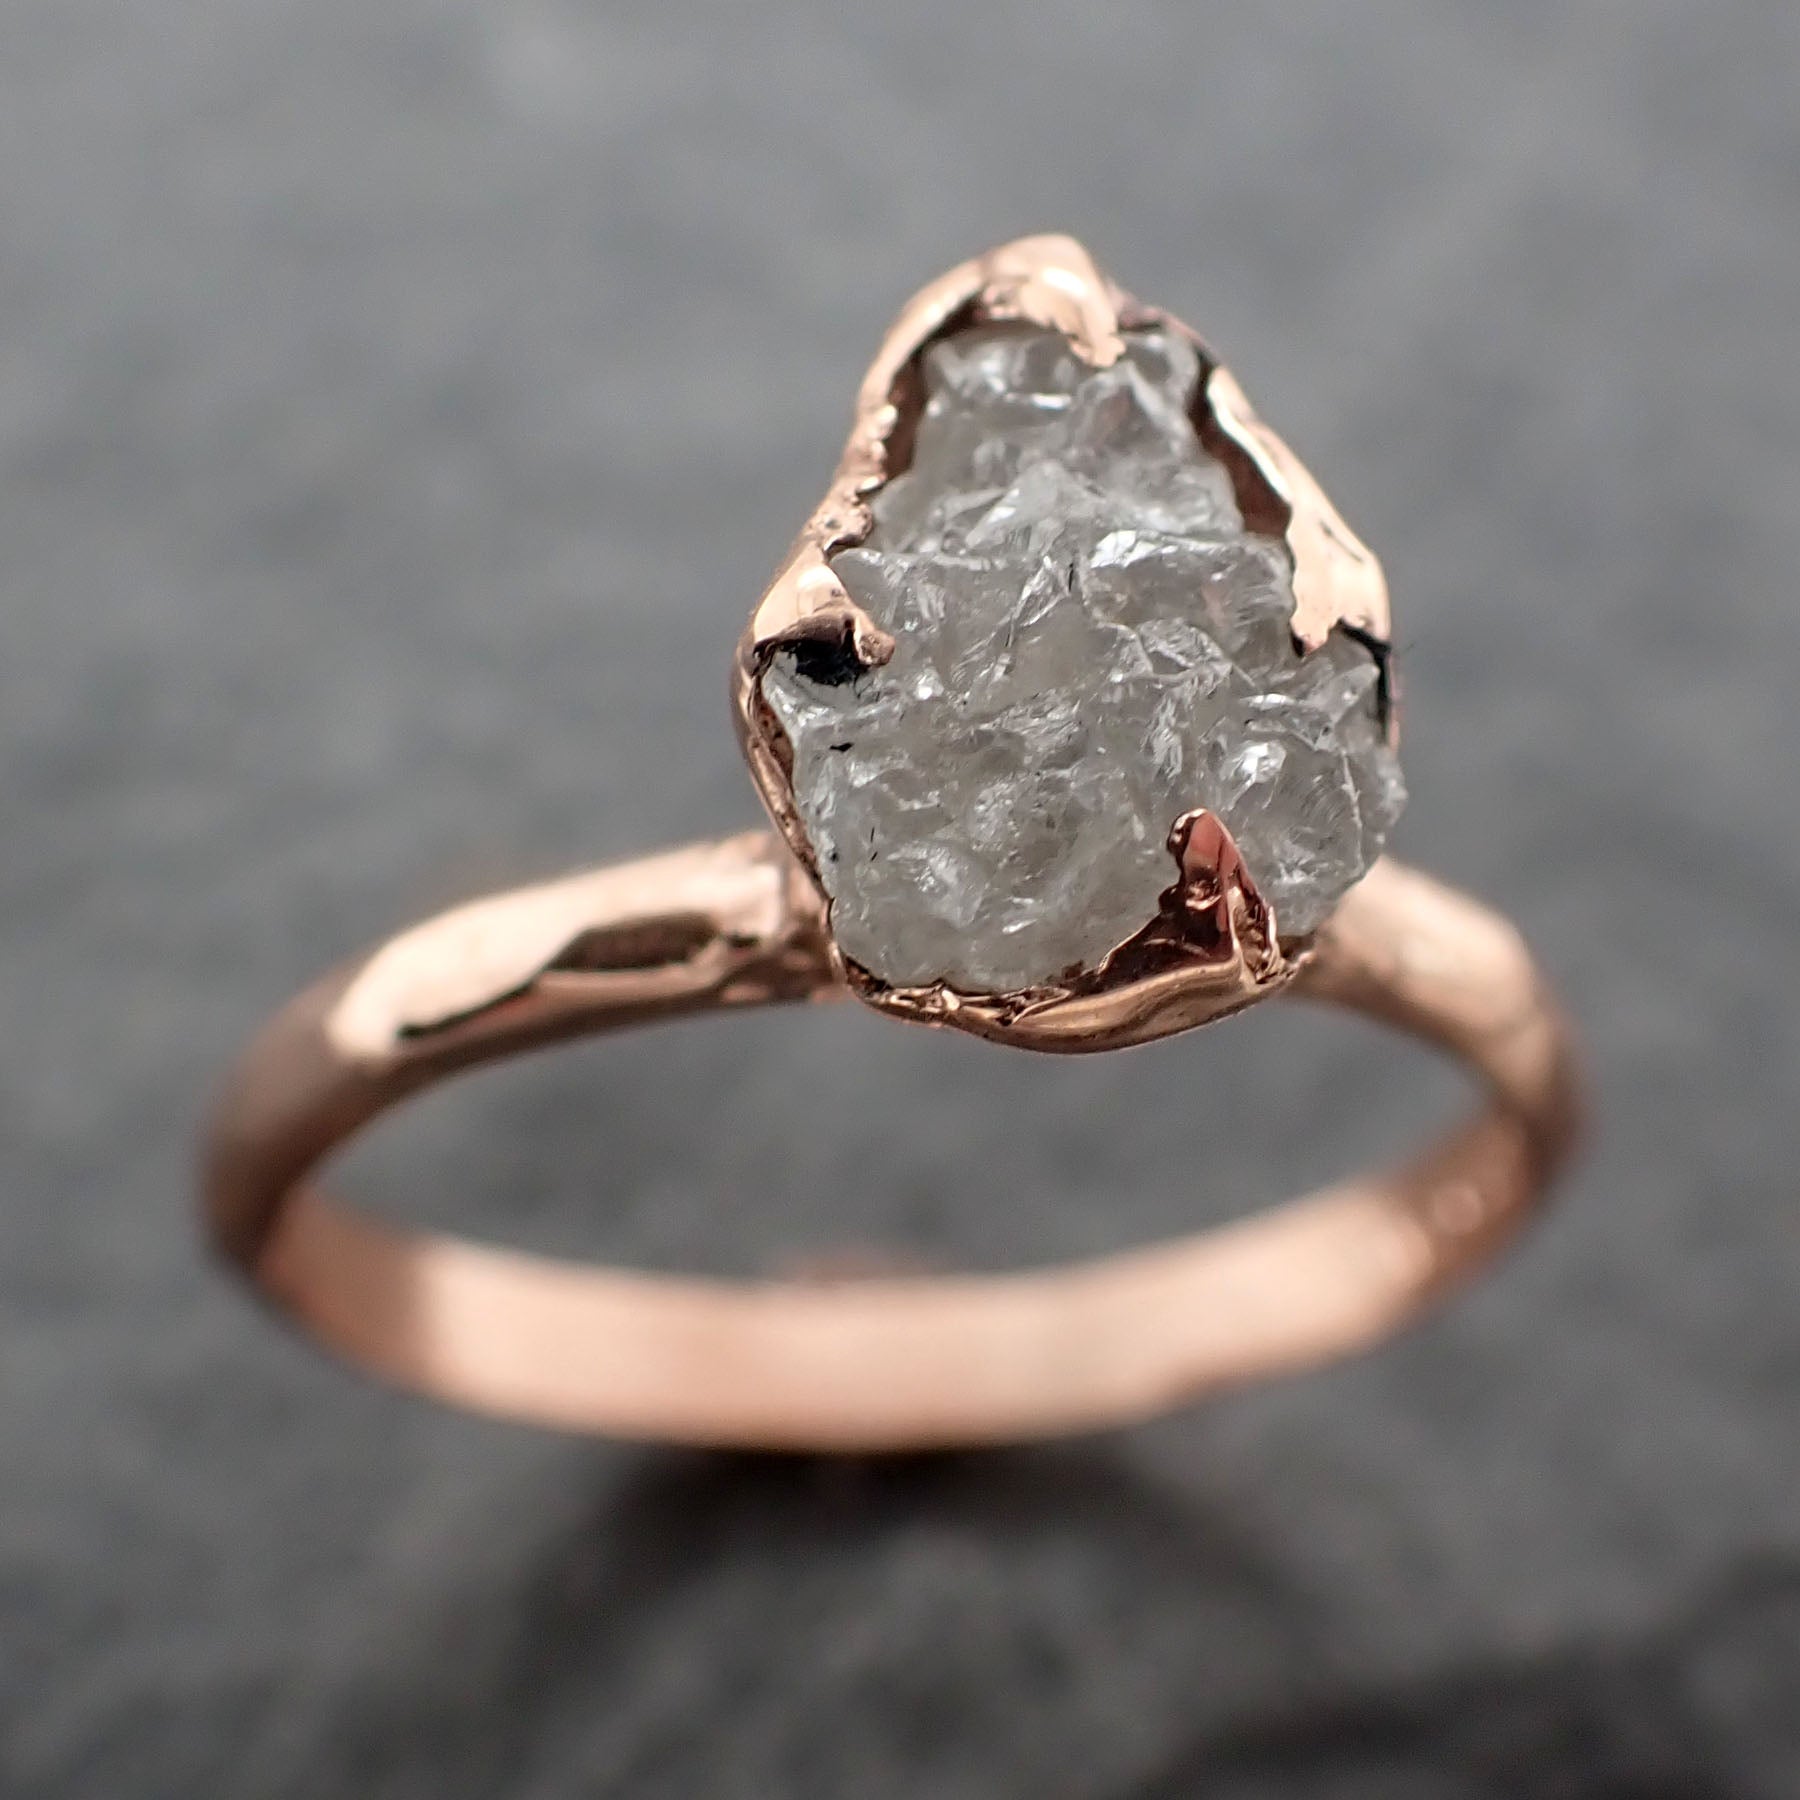 raw diamond solitaire engagement ring rough uncut rose gold conflict free diamond wedding promise 2451.1 Alternative Engagement